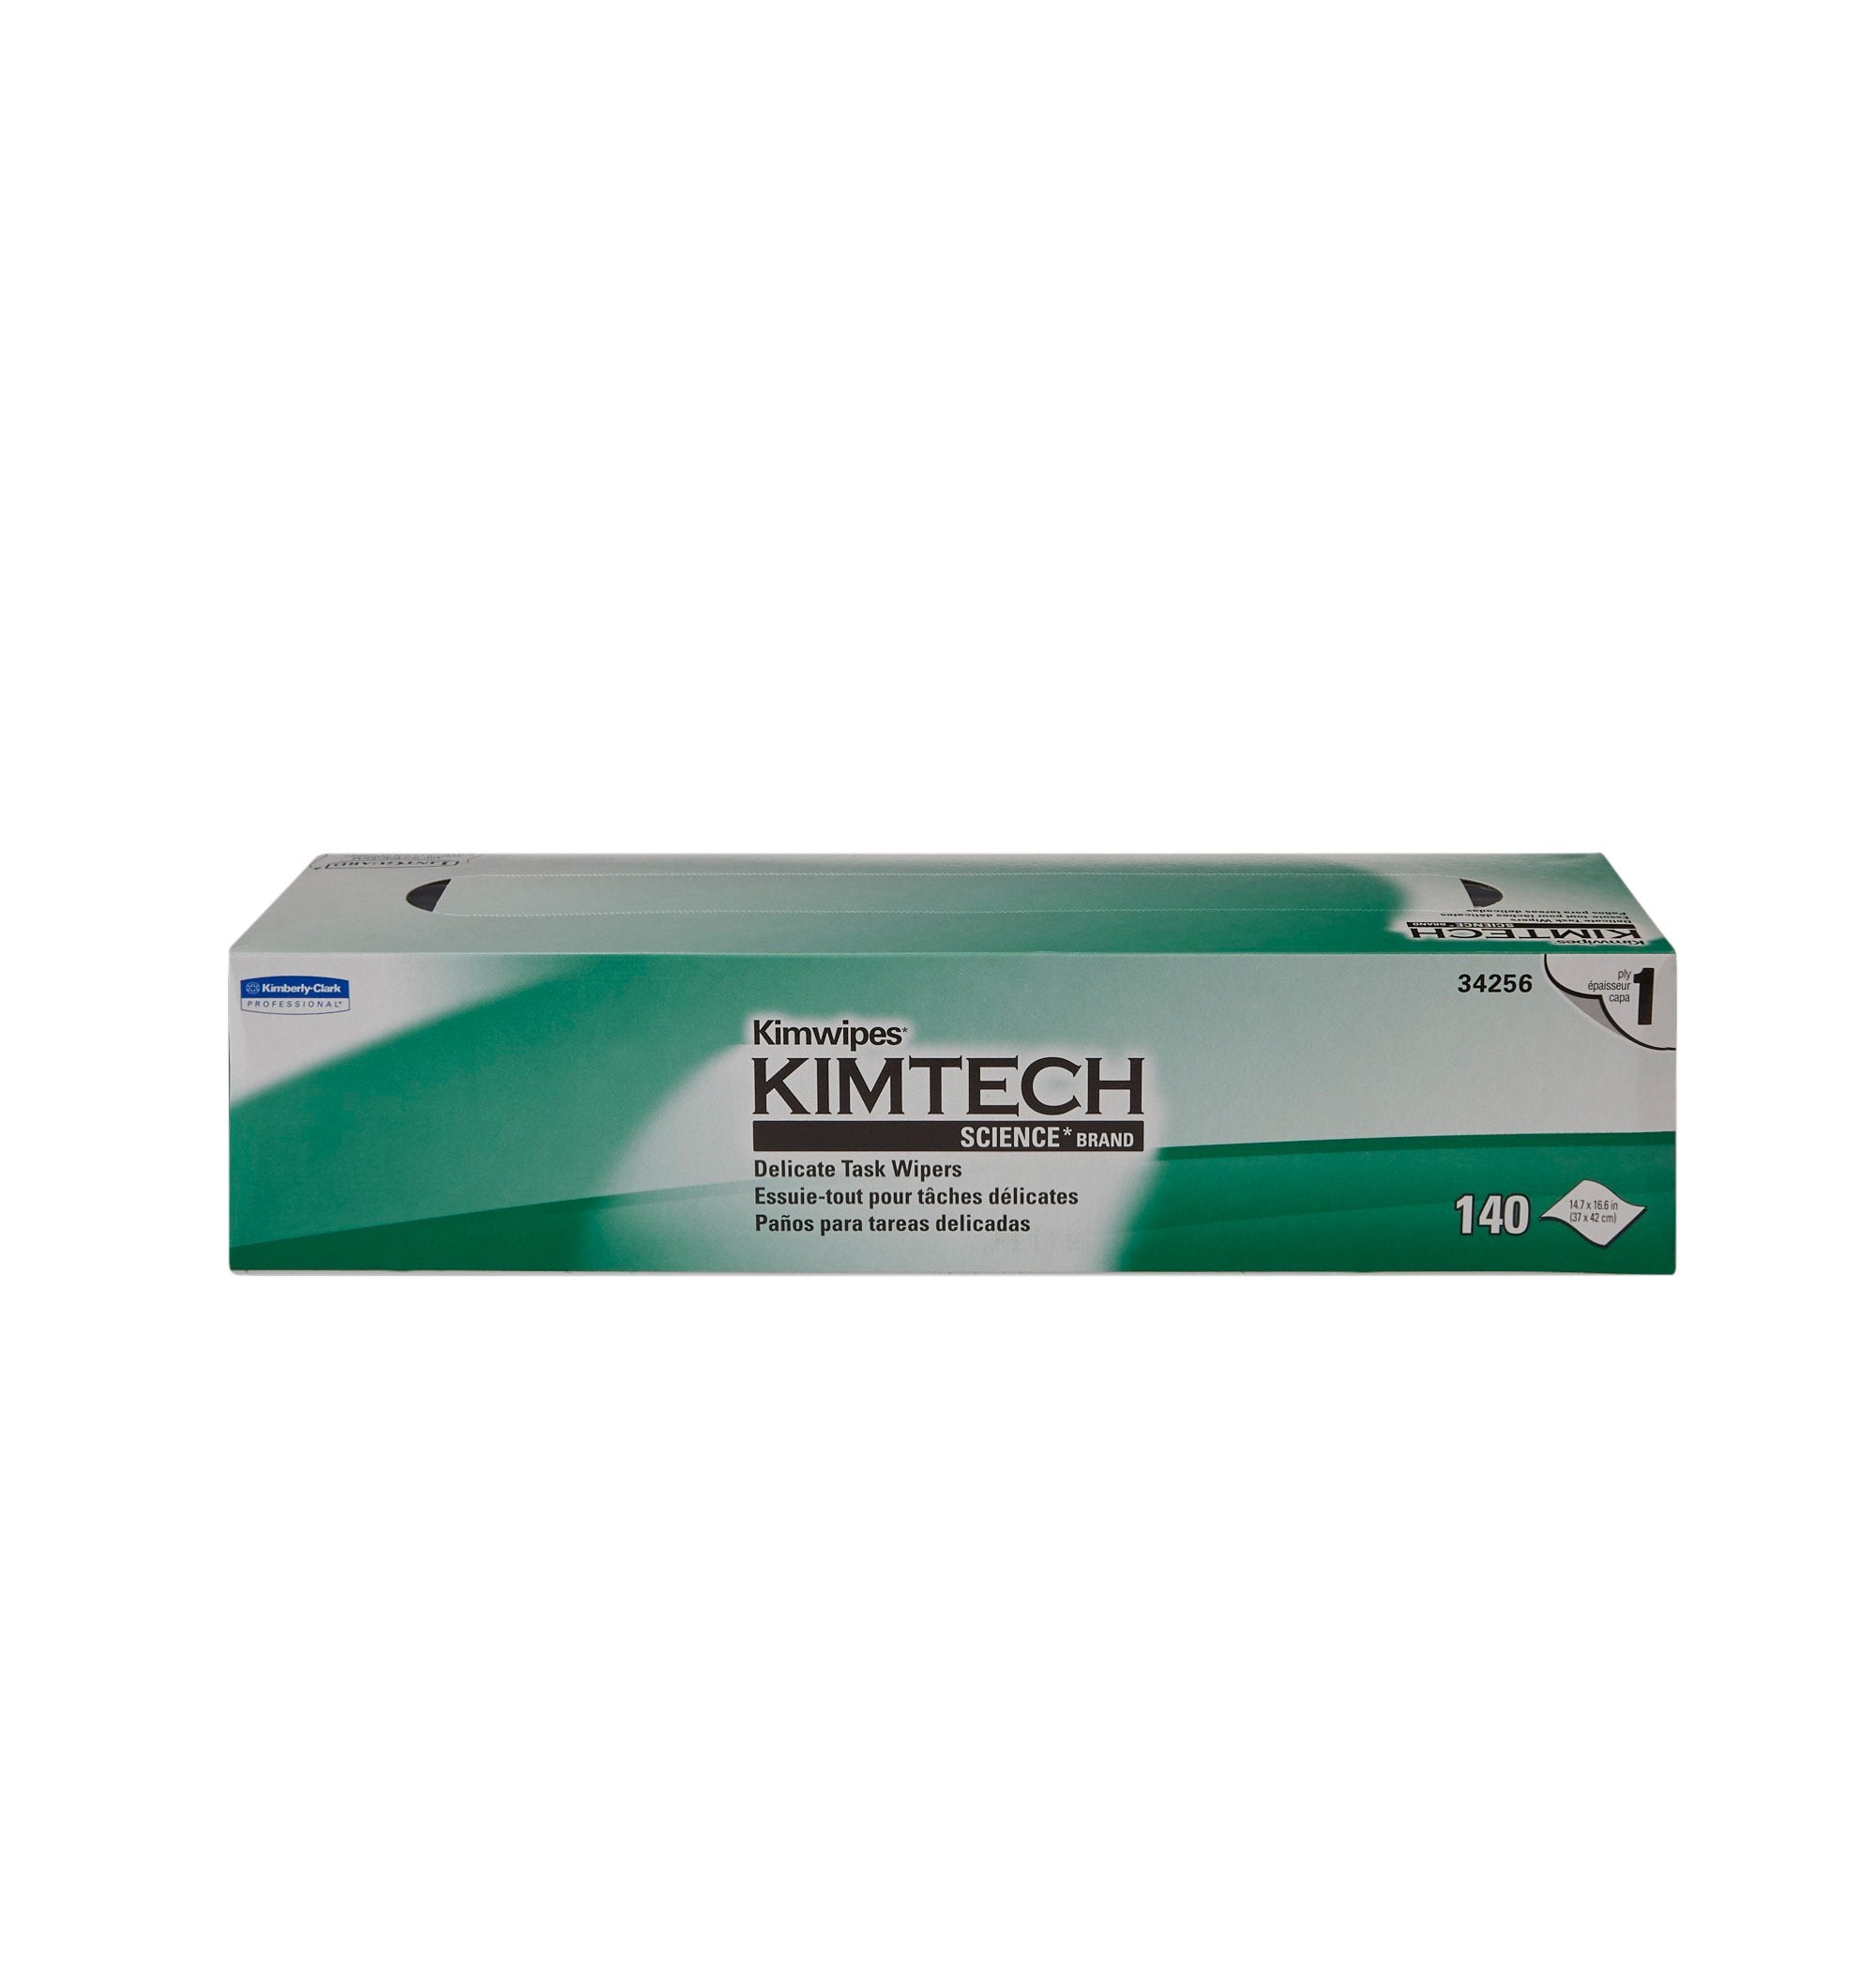 Delicate Task Wipe Kimtech Science Kimwipes Light Duty White NonSterile 1 Ply Tissue 14-7/10 X 16-3/5 Inch Disposable